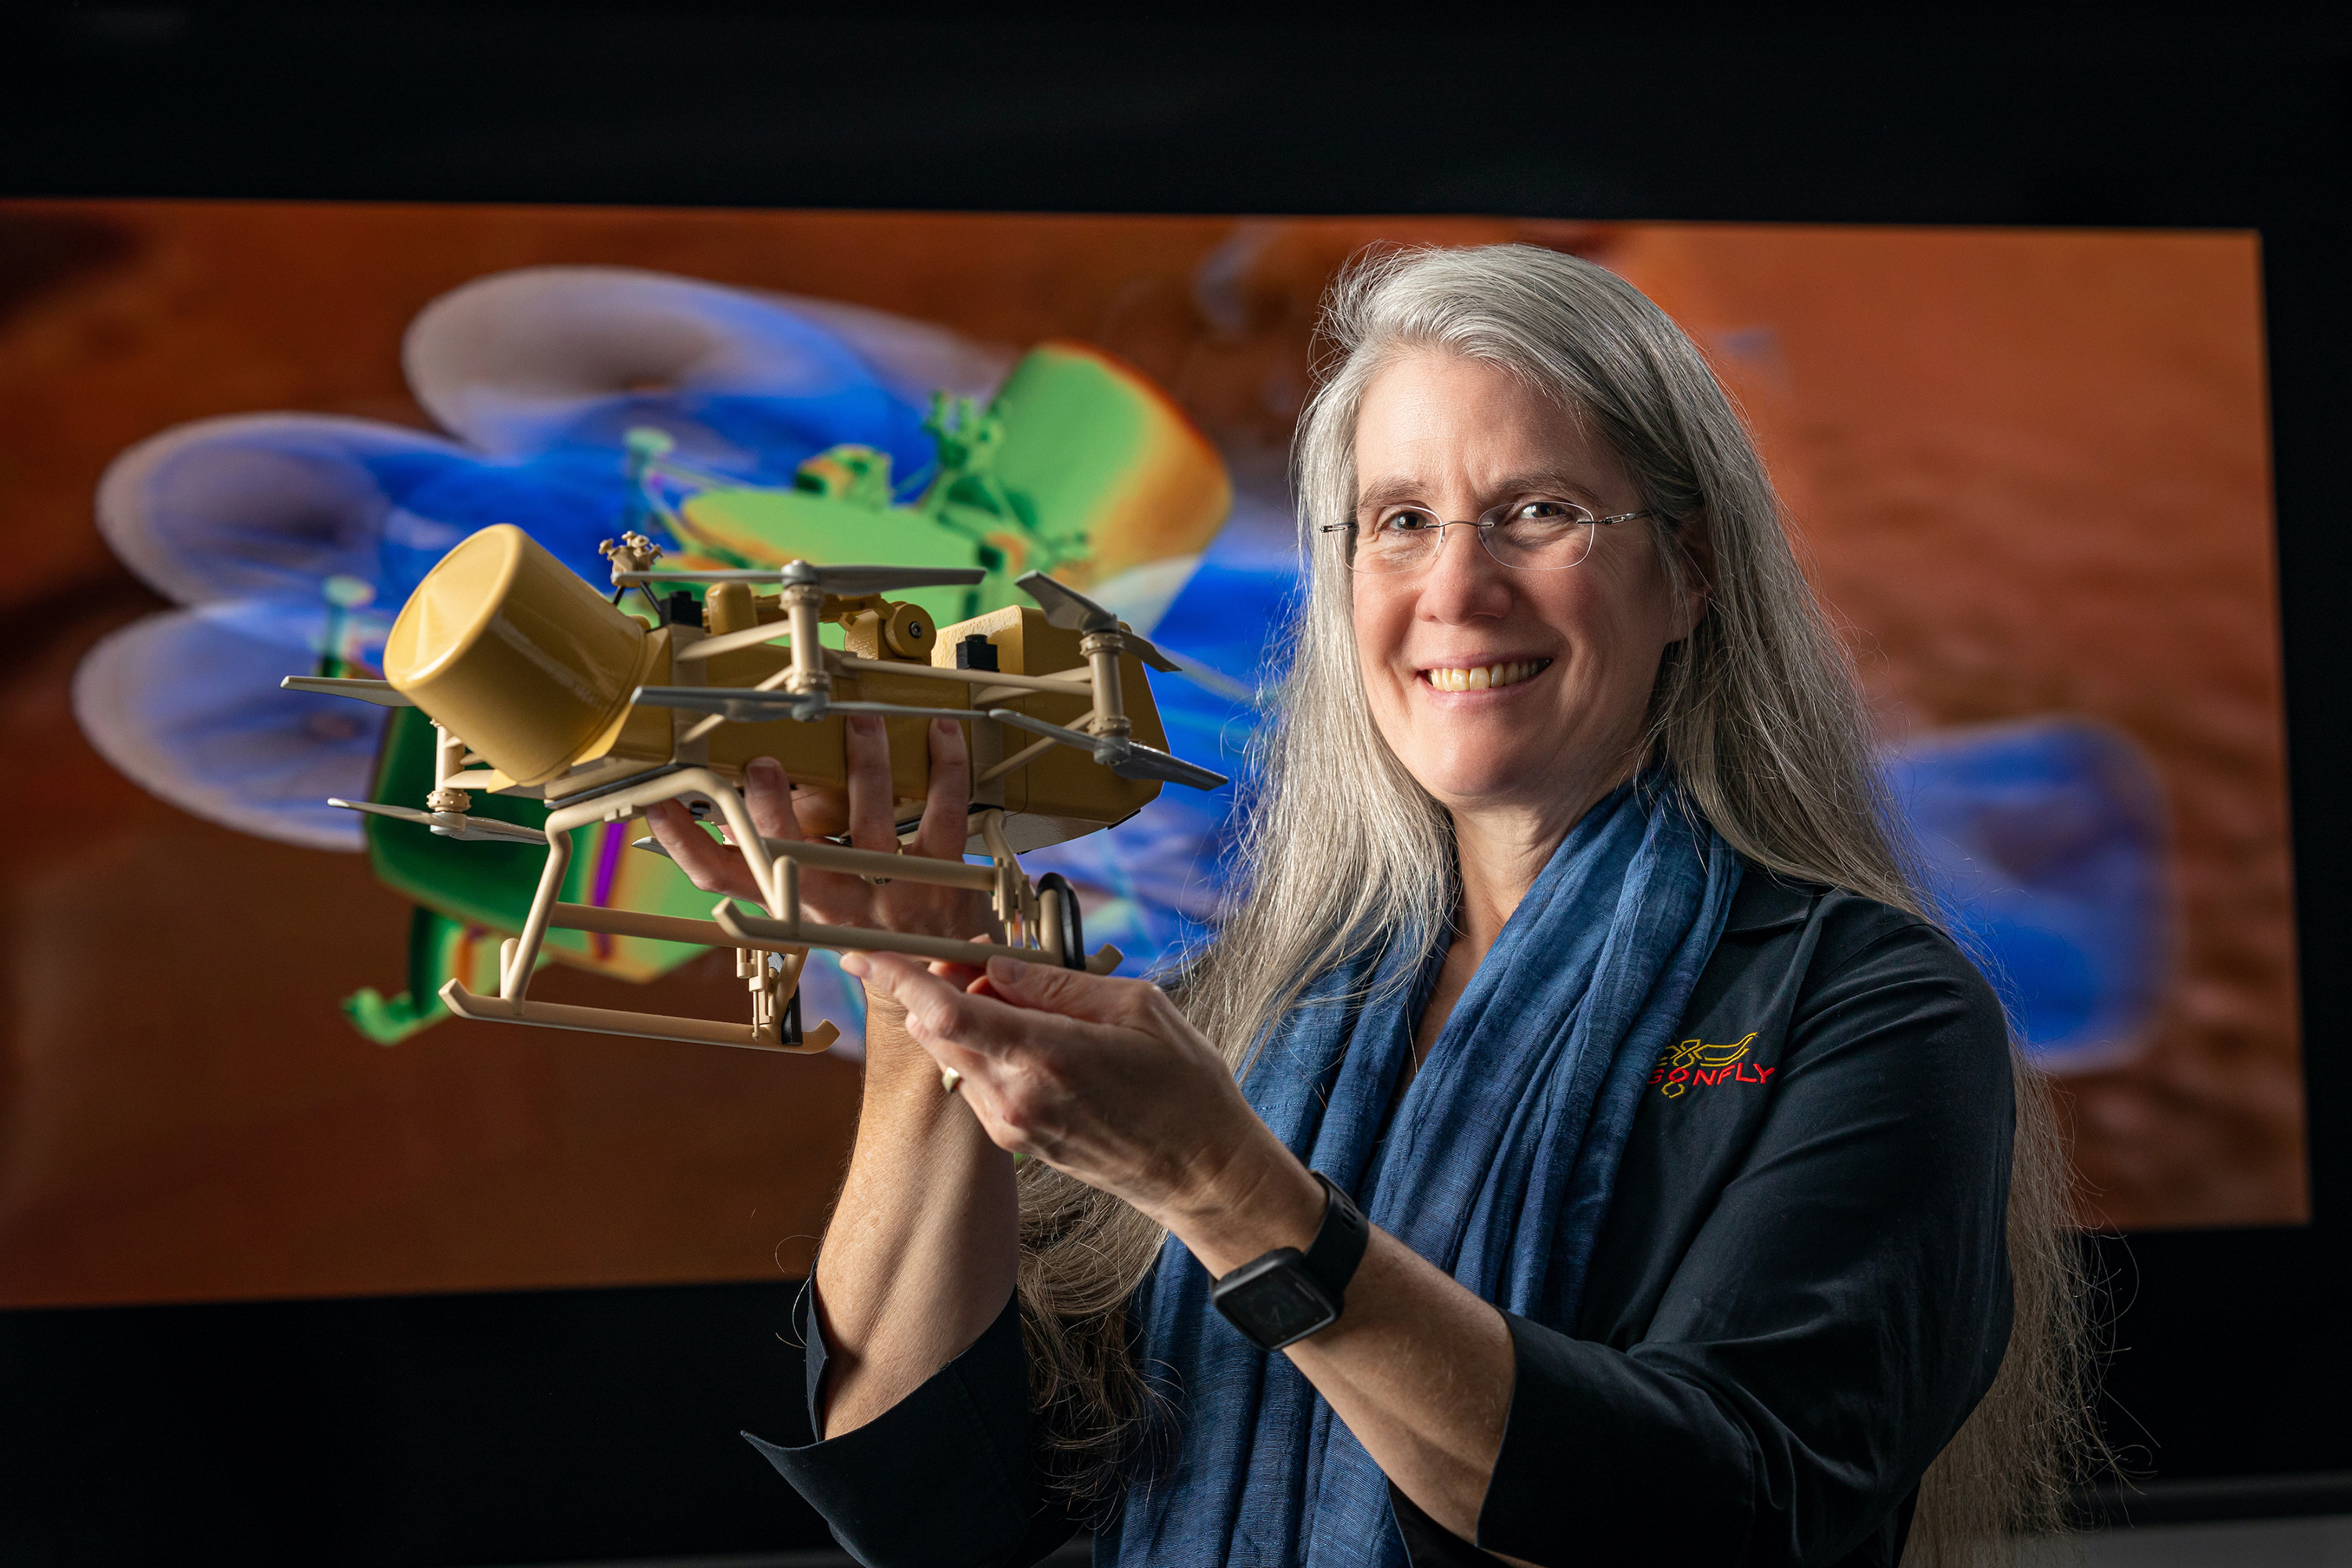 Elizabeth "Zibi" Turtle holds a small replica of NASA's Dragonfly spacecraft